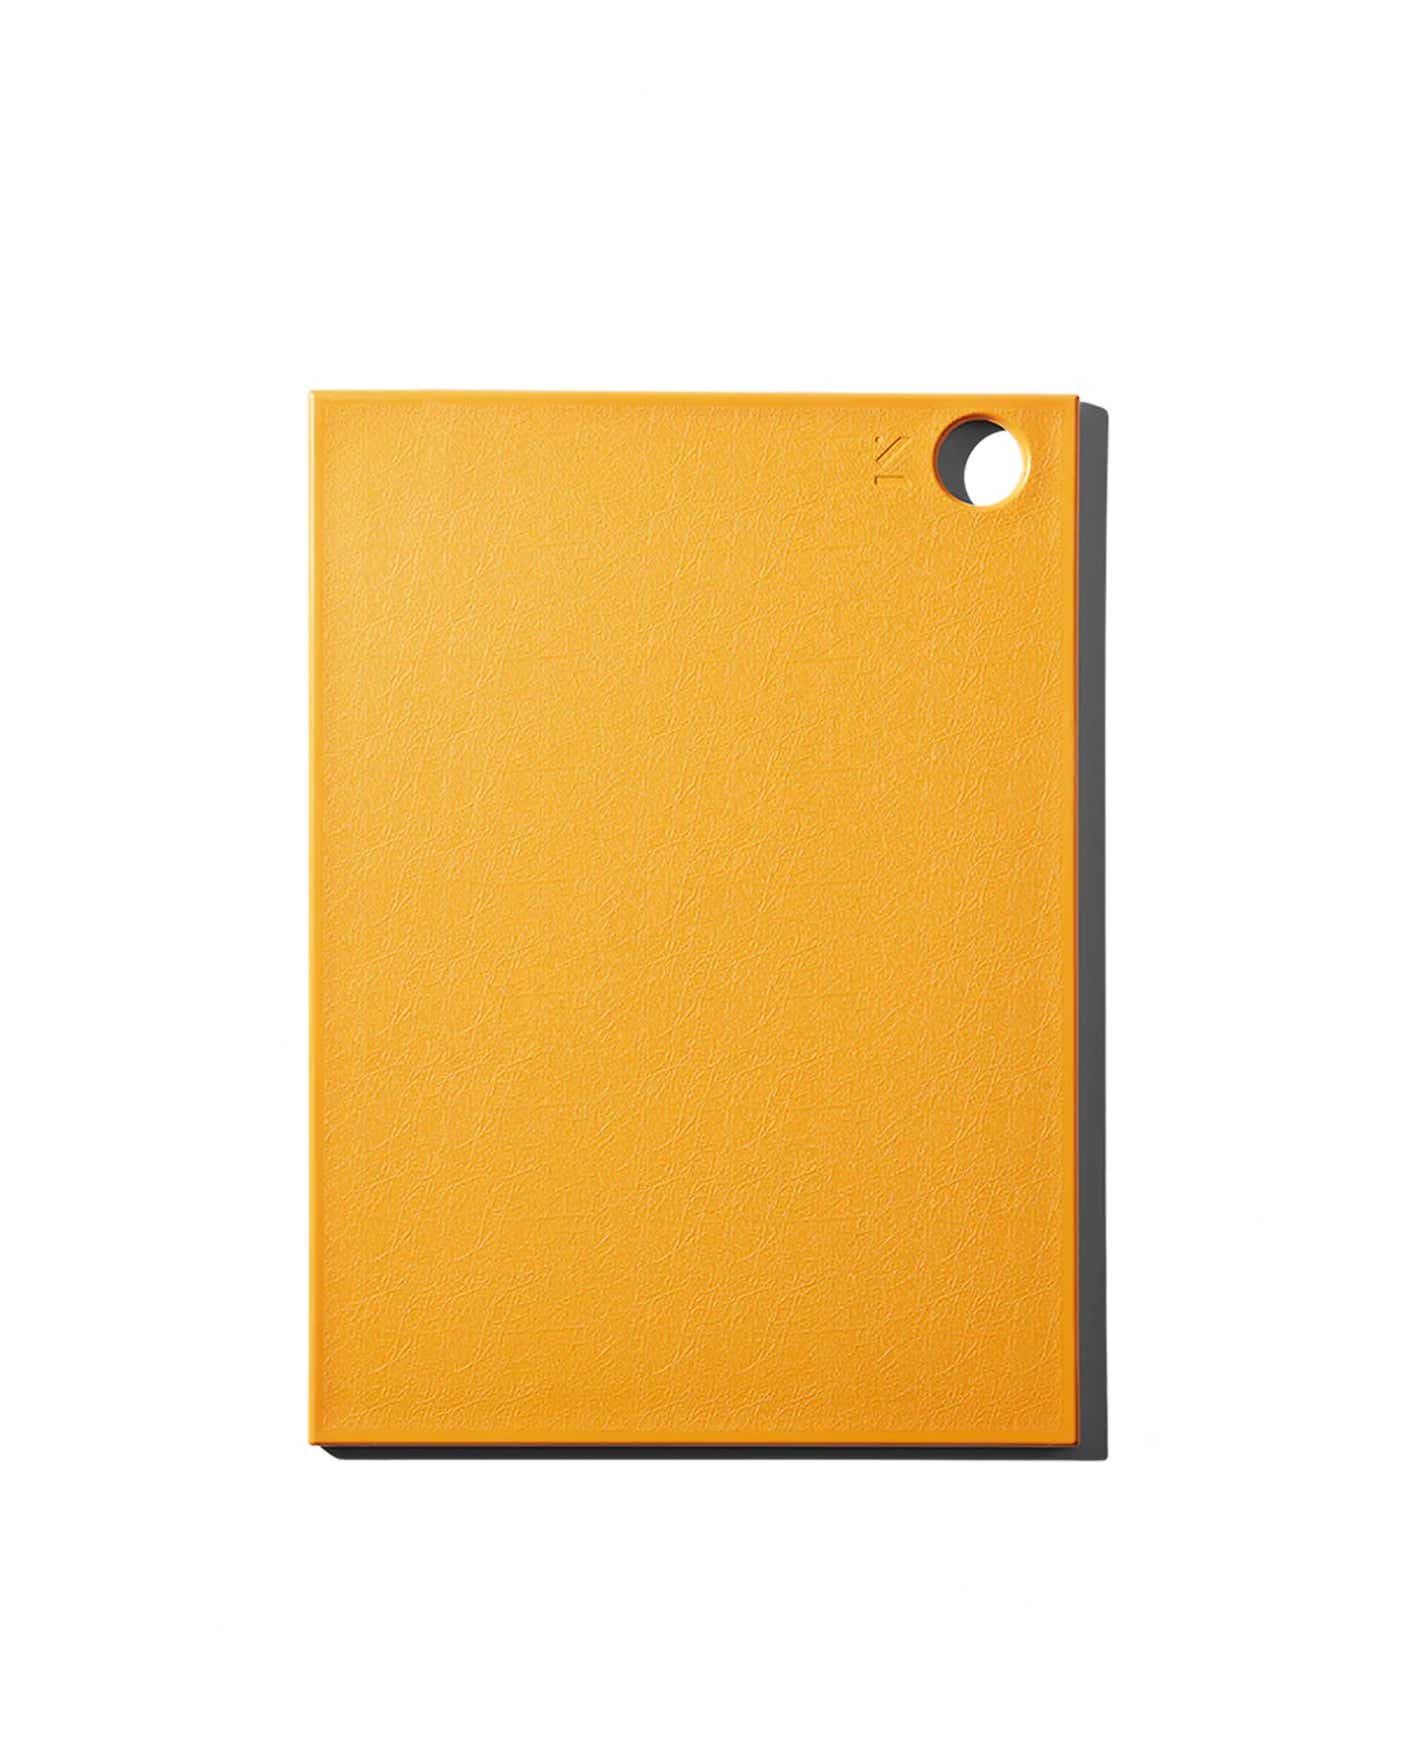 A yellow-orange cutting board with a hole (for hanging if needed) in the corner is shown flat.